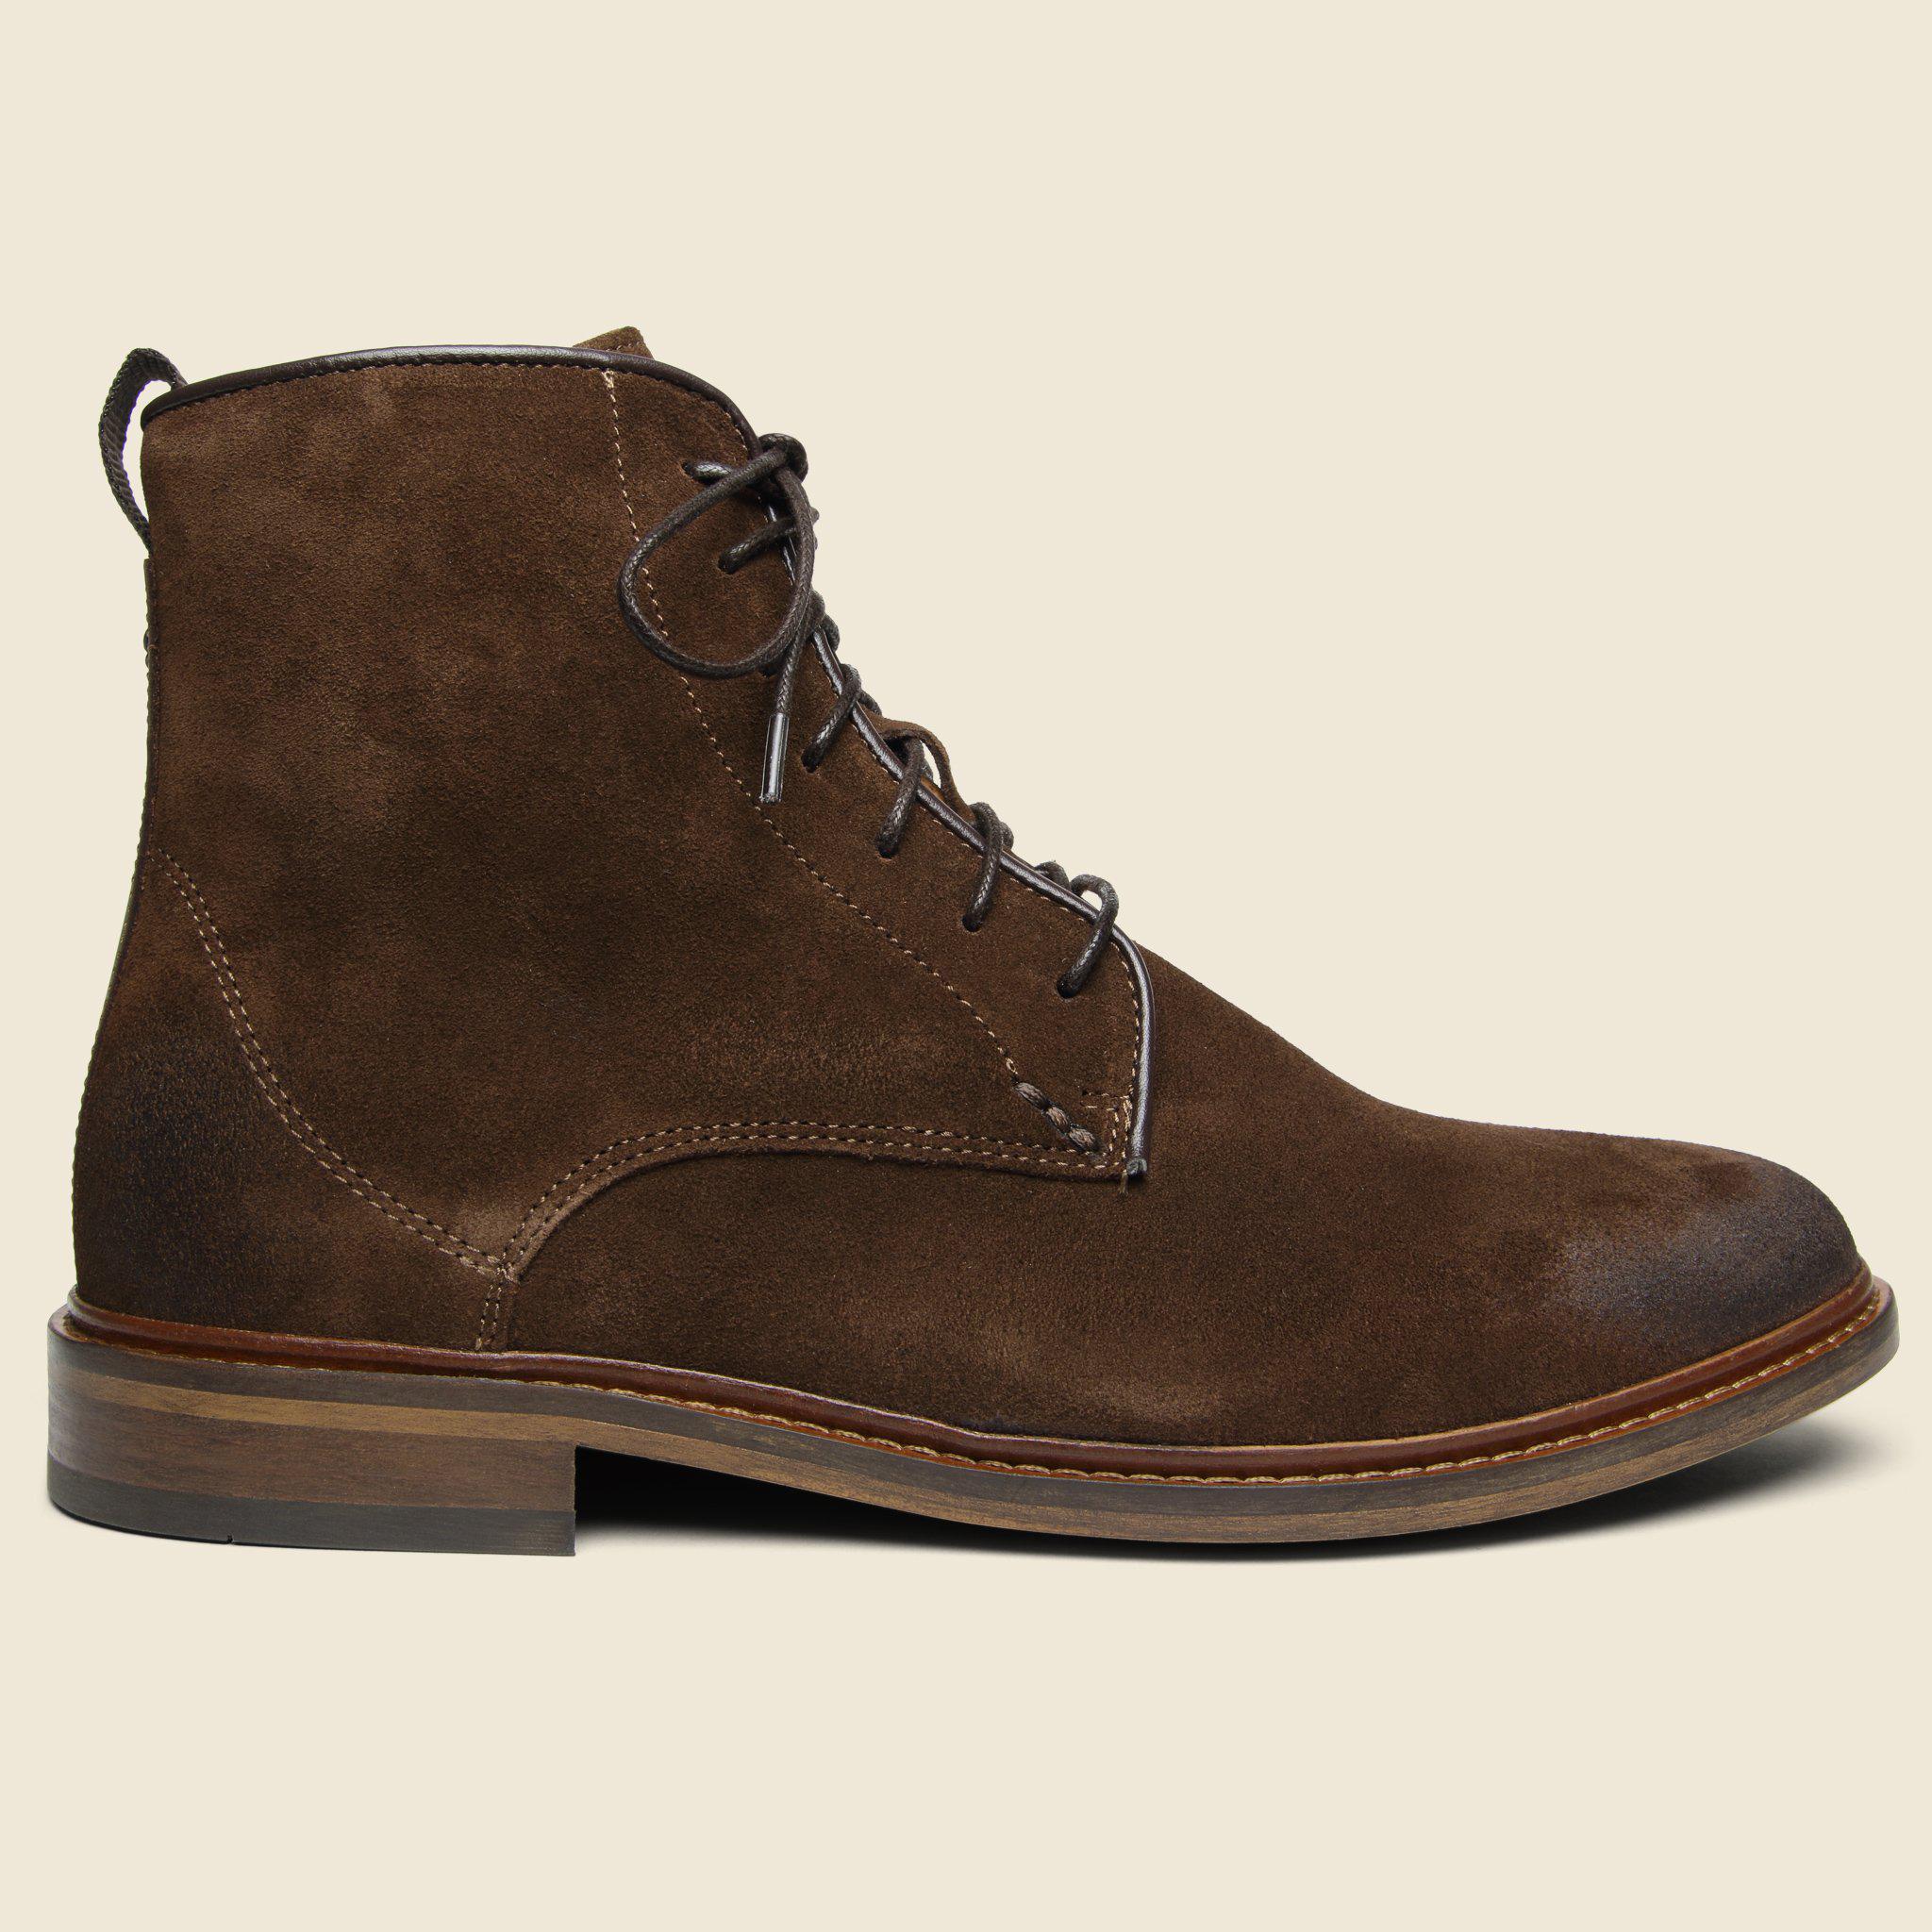 Lyst - Shoe The Bear Ned Suede Lace-up Boot - Light Brown in Brown for Men